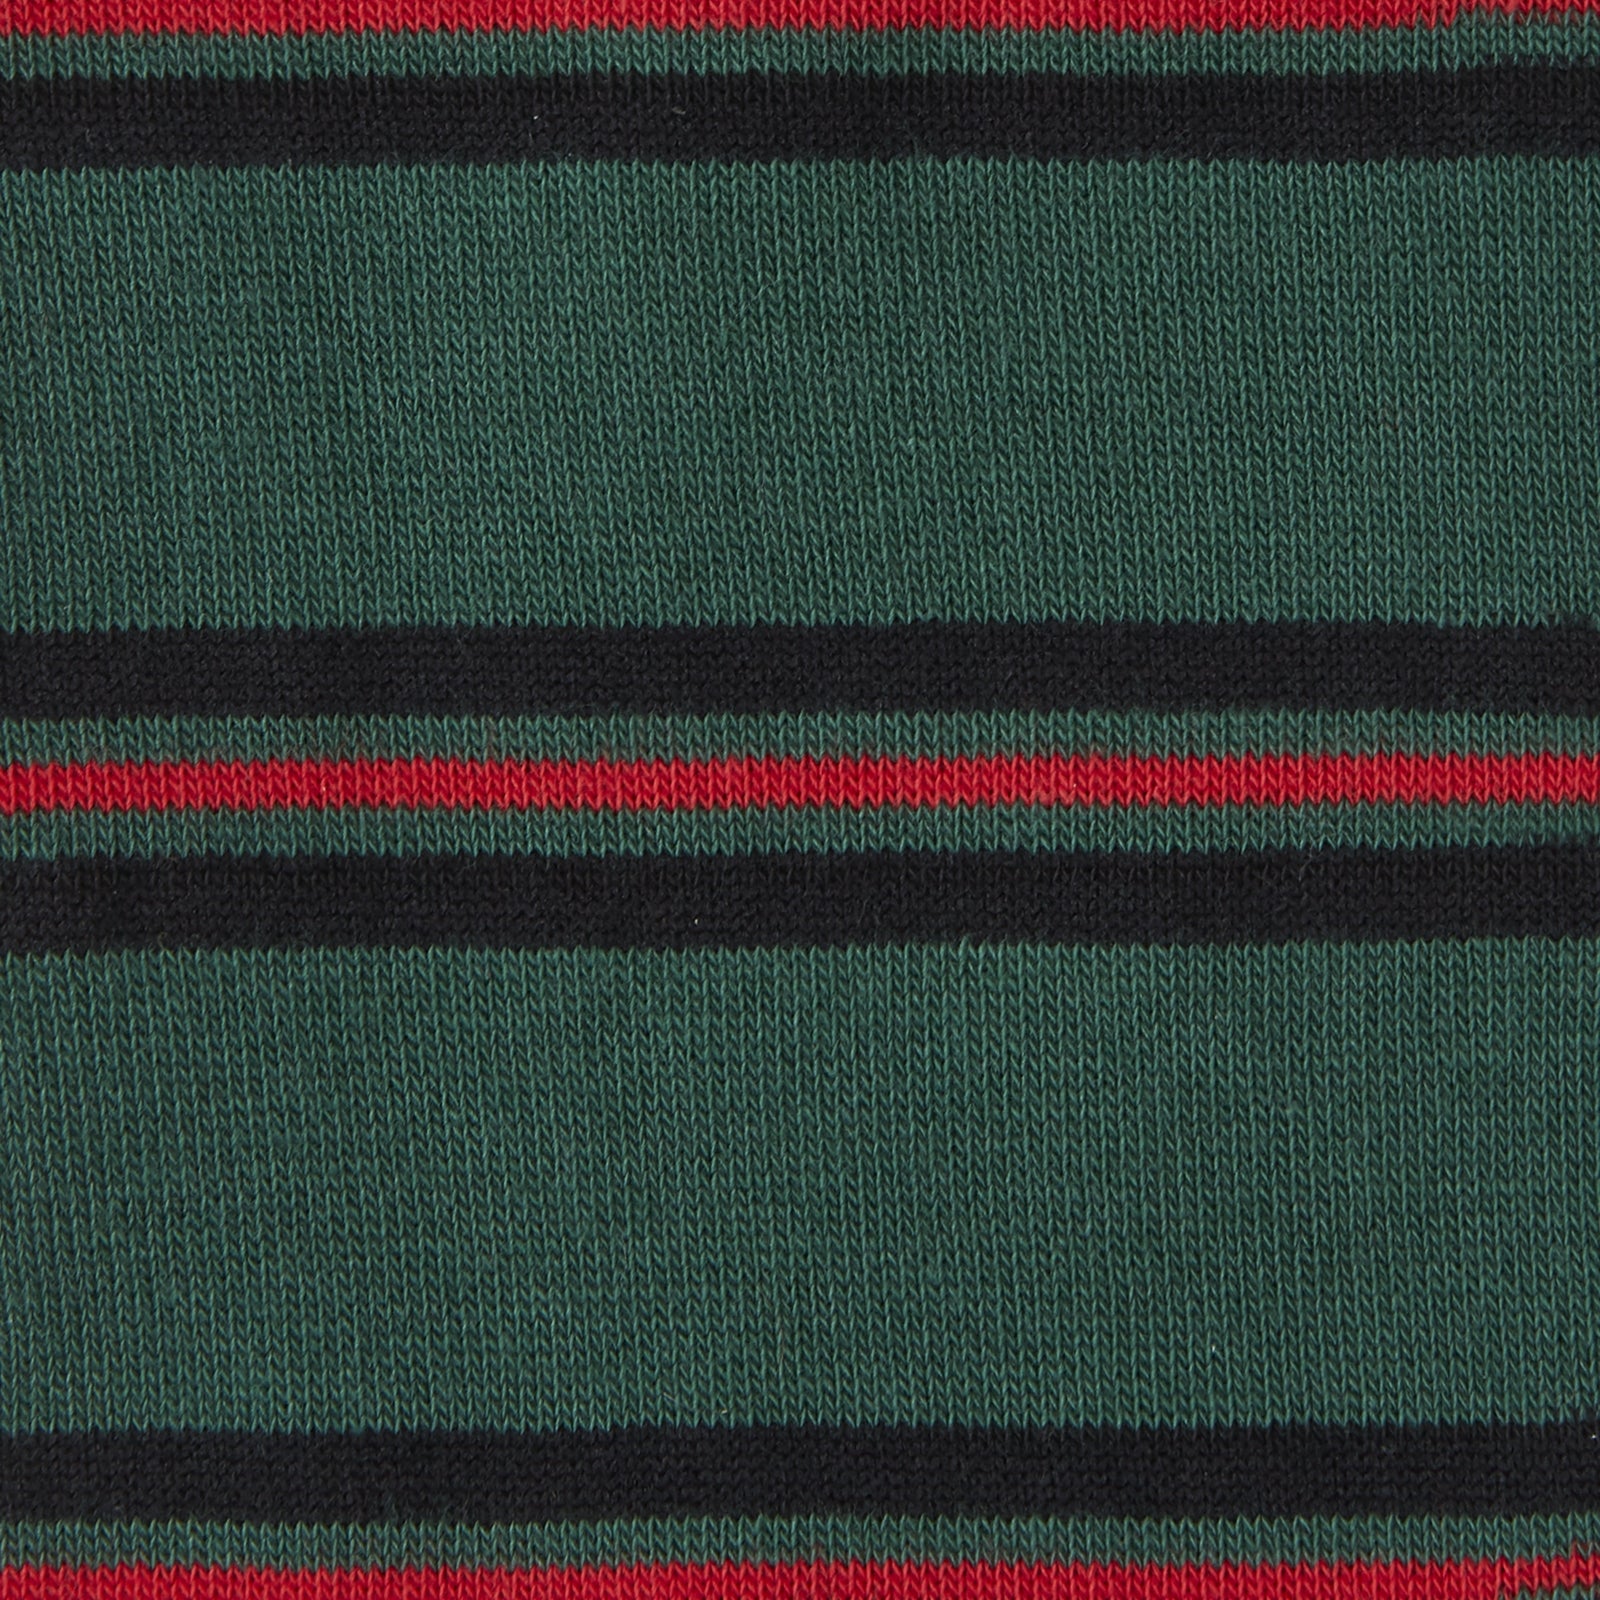 Forest Green, Black and Red Stripe Cotton Mix Short Socks